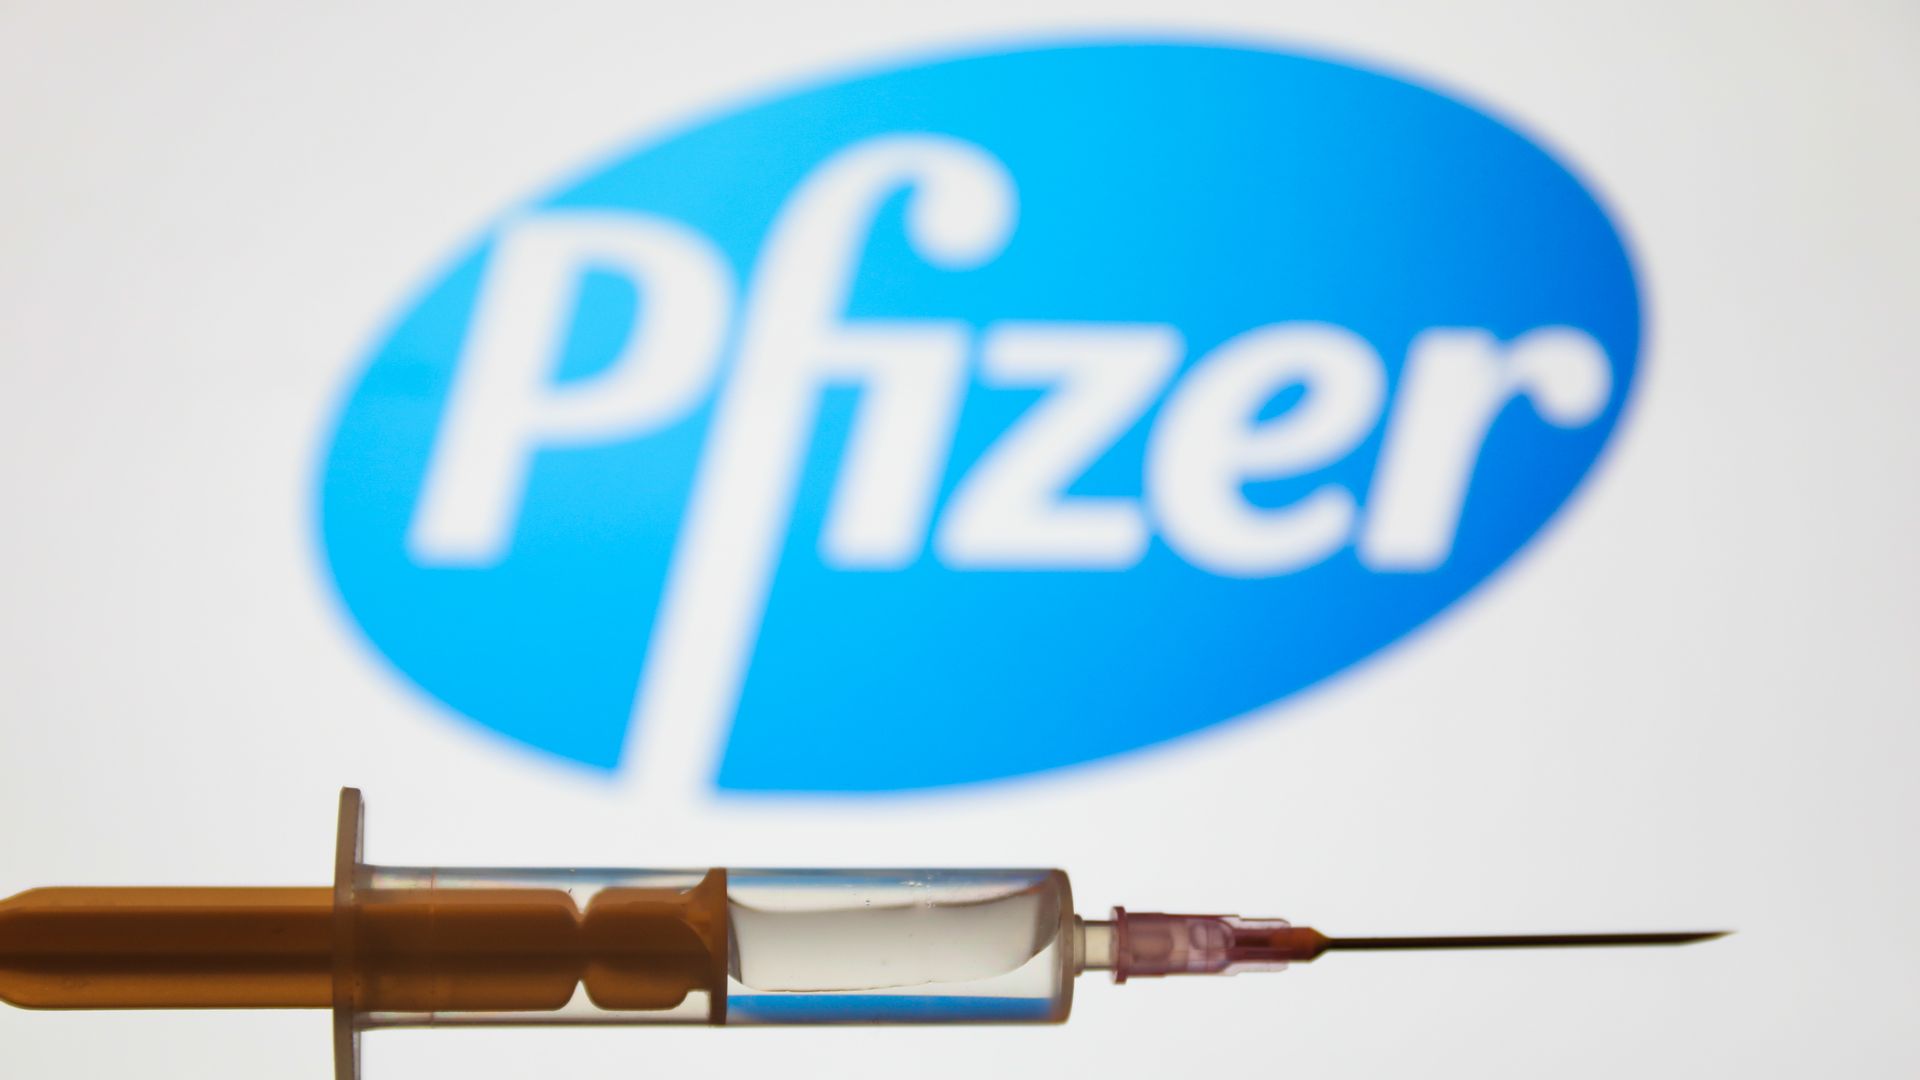 Pfizer's blue logo in the background, and a vaccine syringe in the foreground.